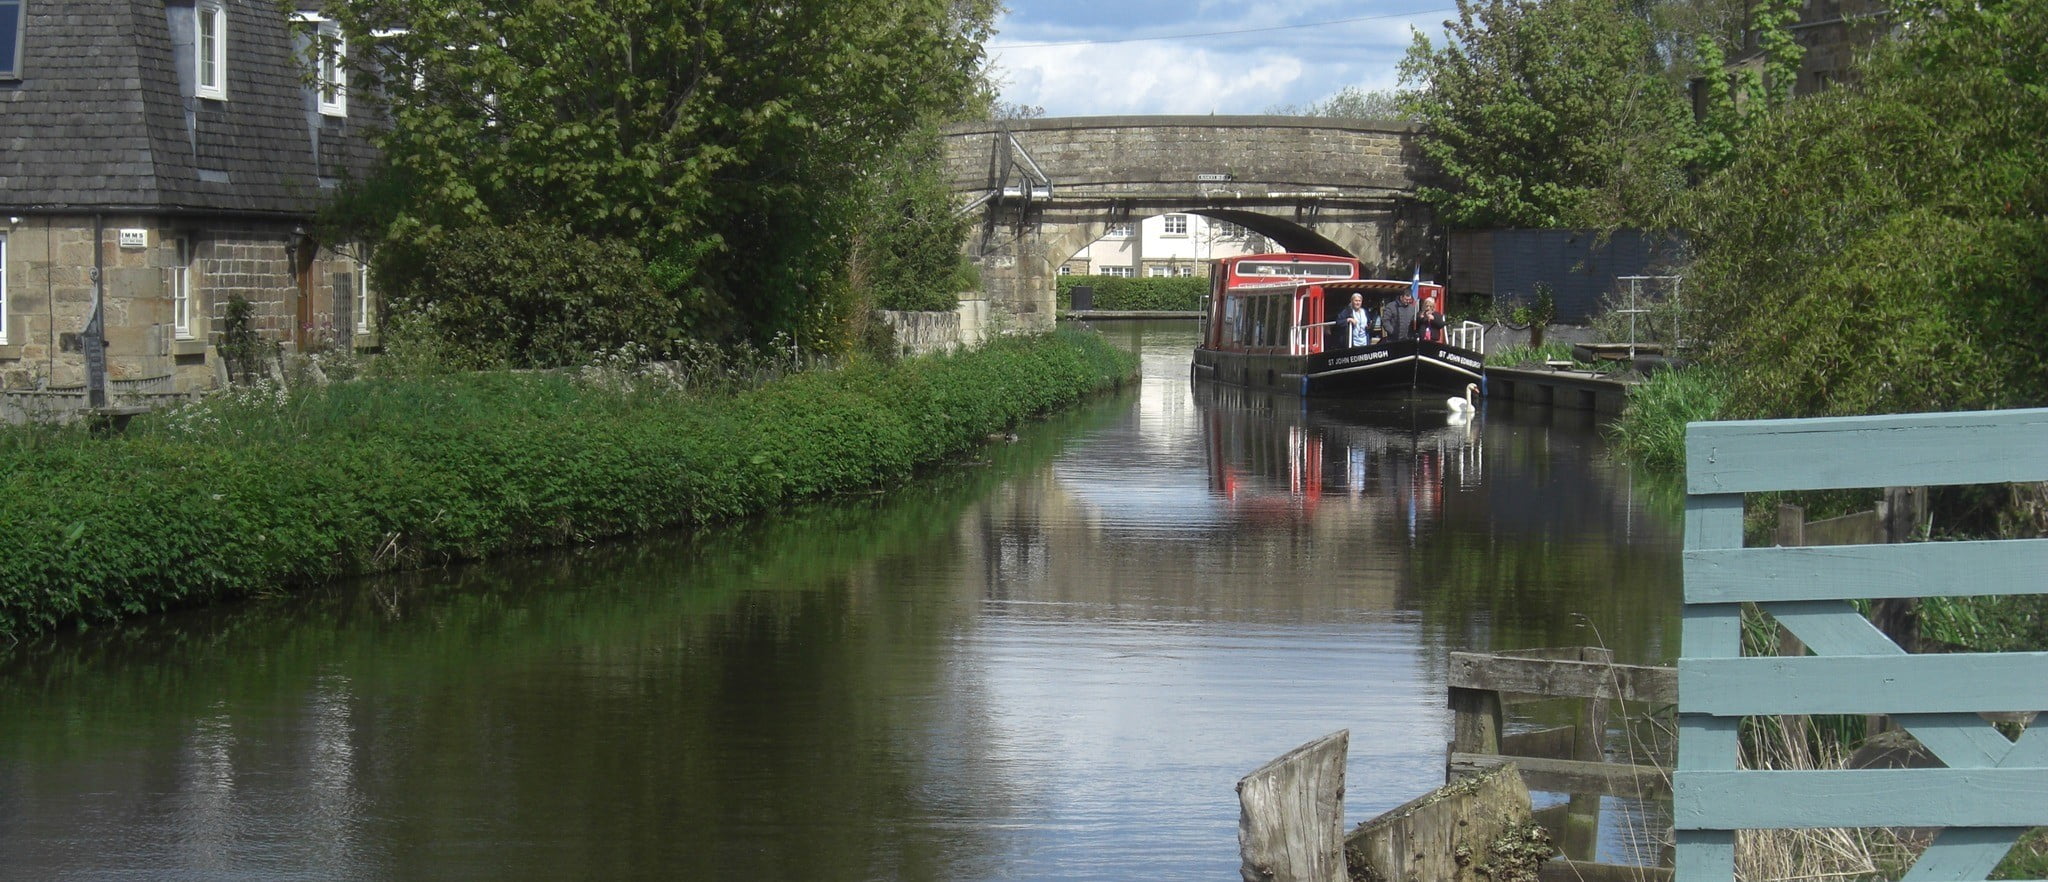 Red barge, with a few people standing at the front, travels slowly down a canal surrounded by green trees.